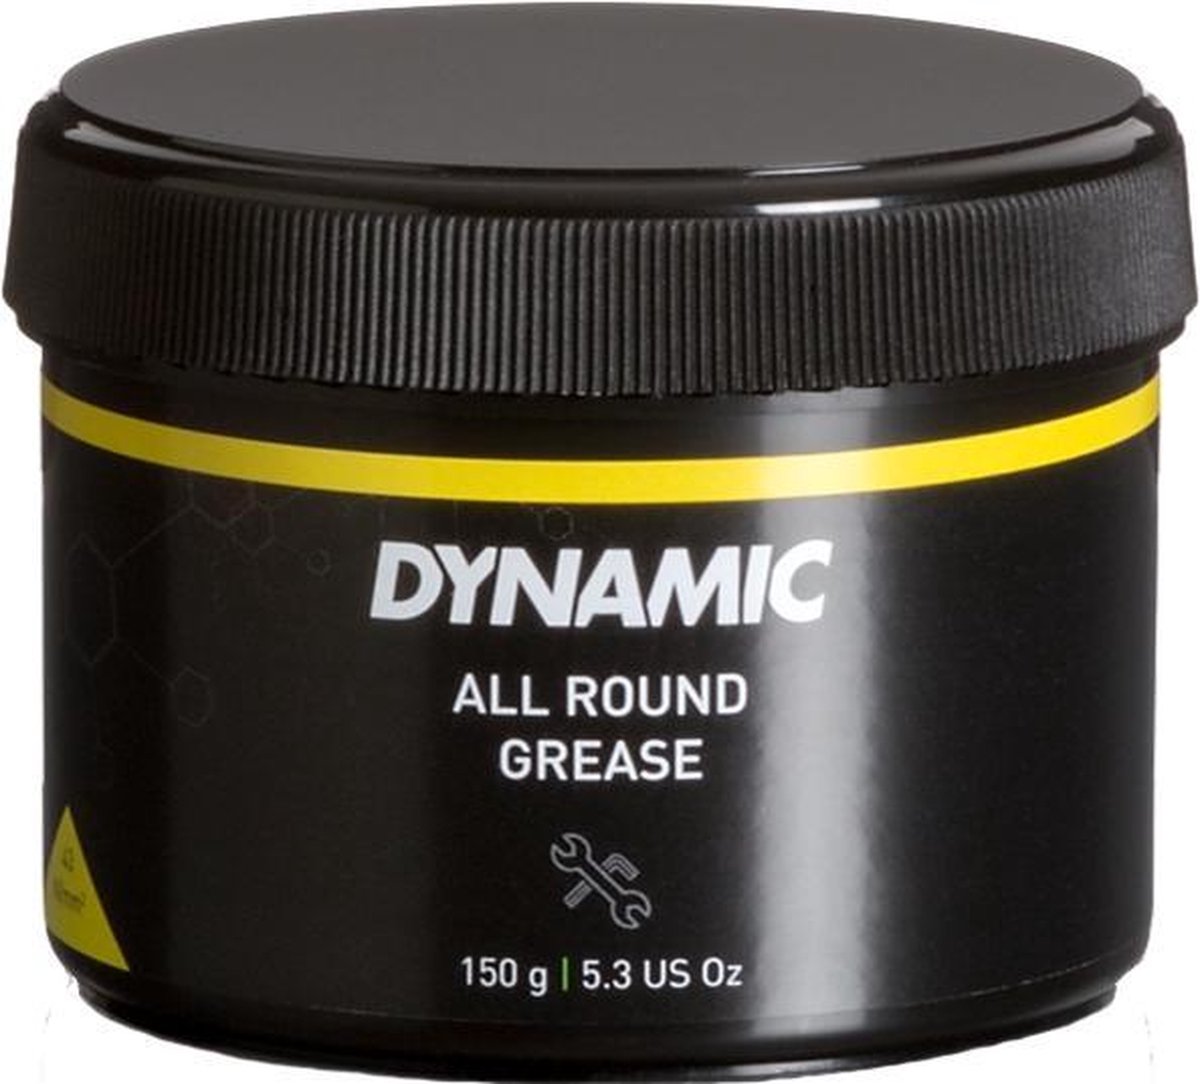 Dynamic - All Round Grease 150g - montagevet montagepasta voor fiets - Dynamic Bike Care